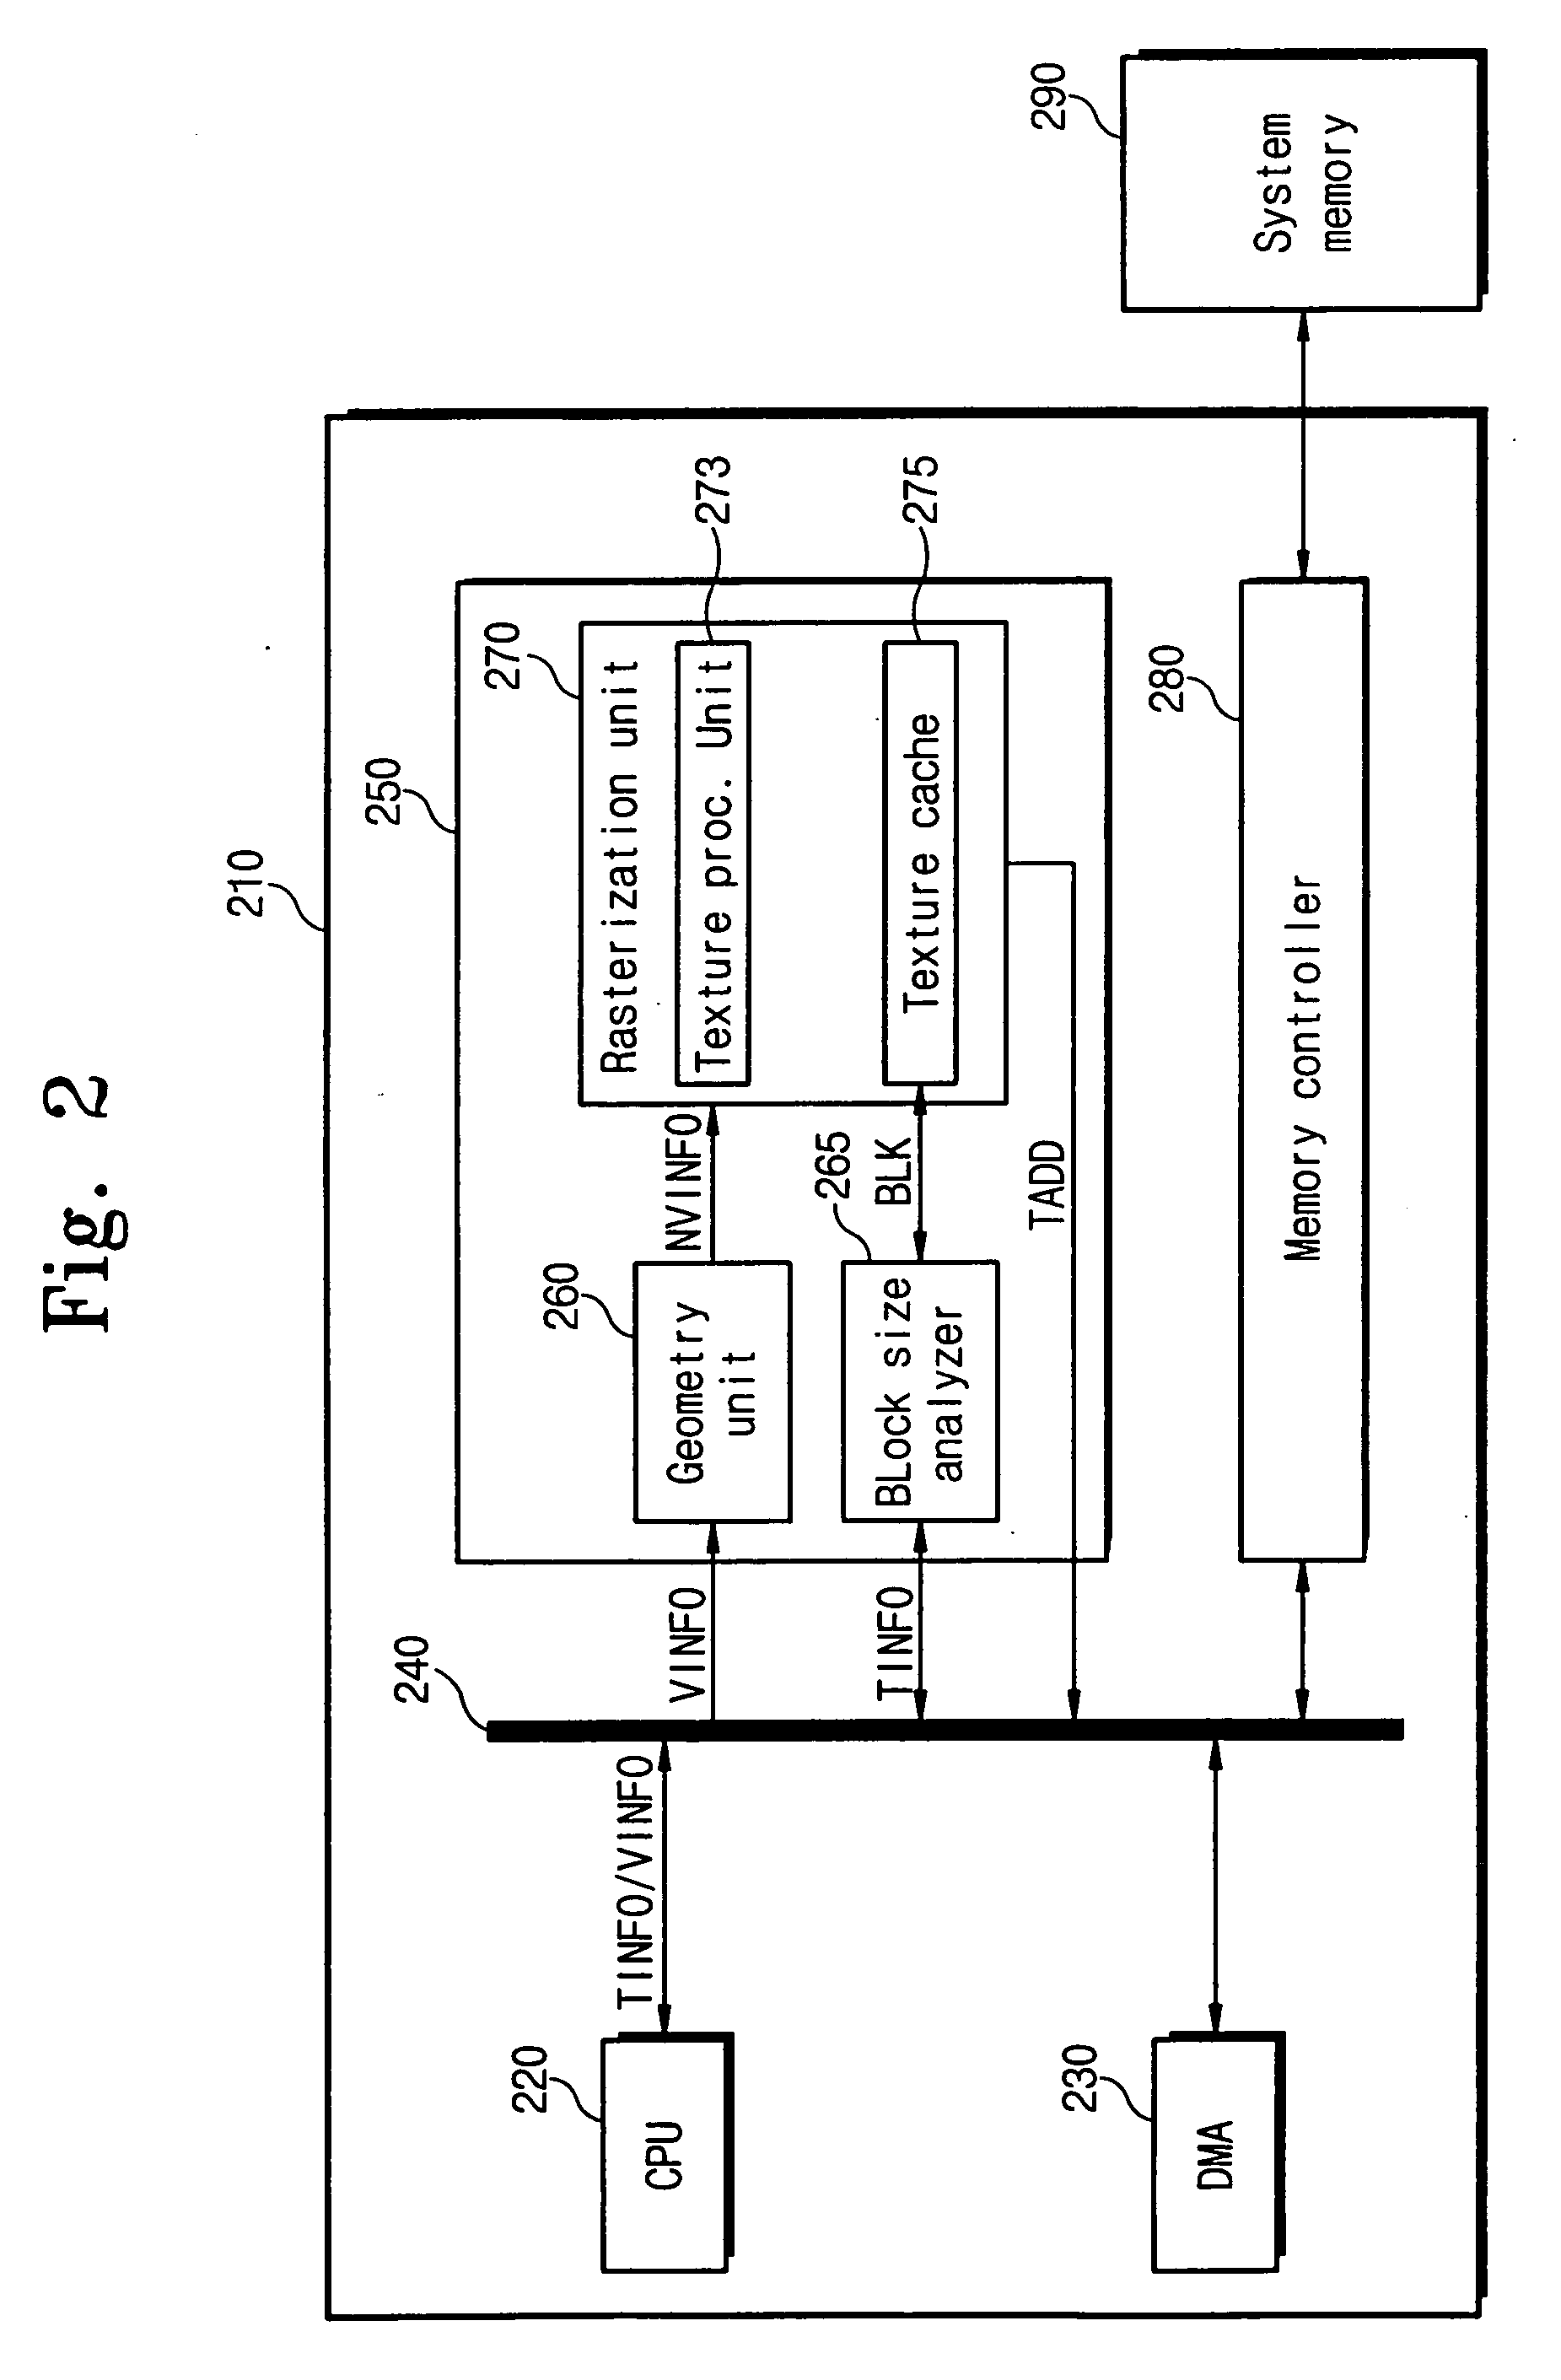 Graphic systems and methods having variable texture cache block size